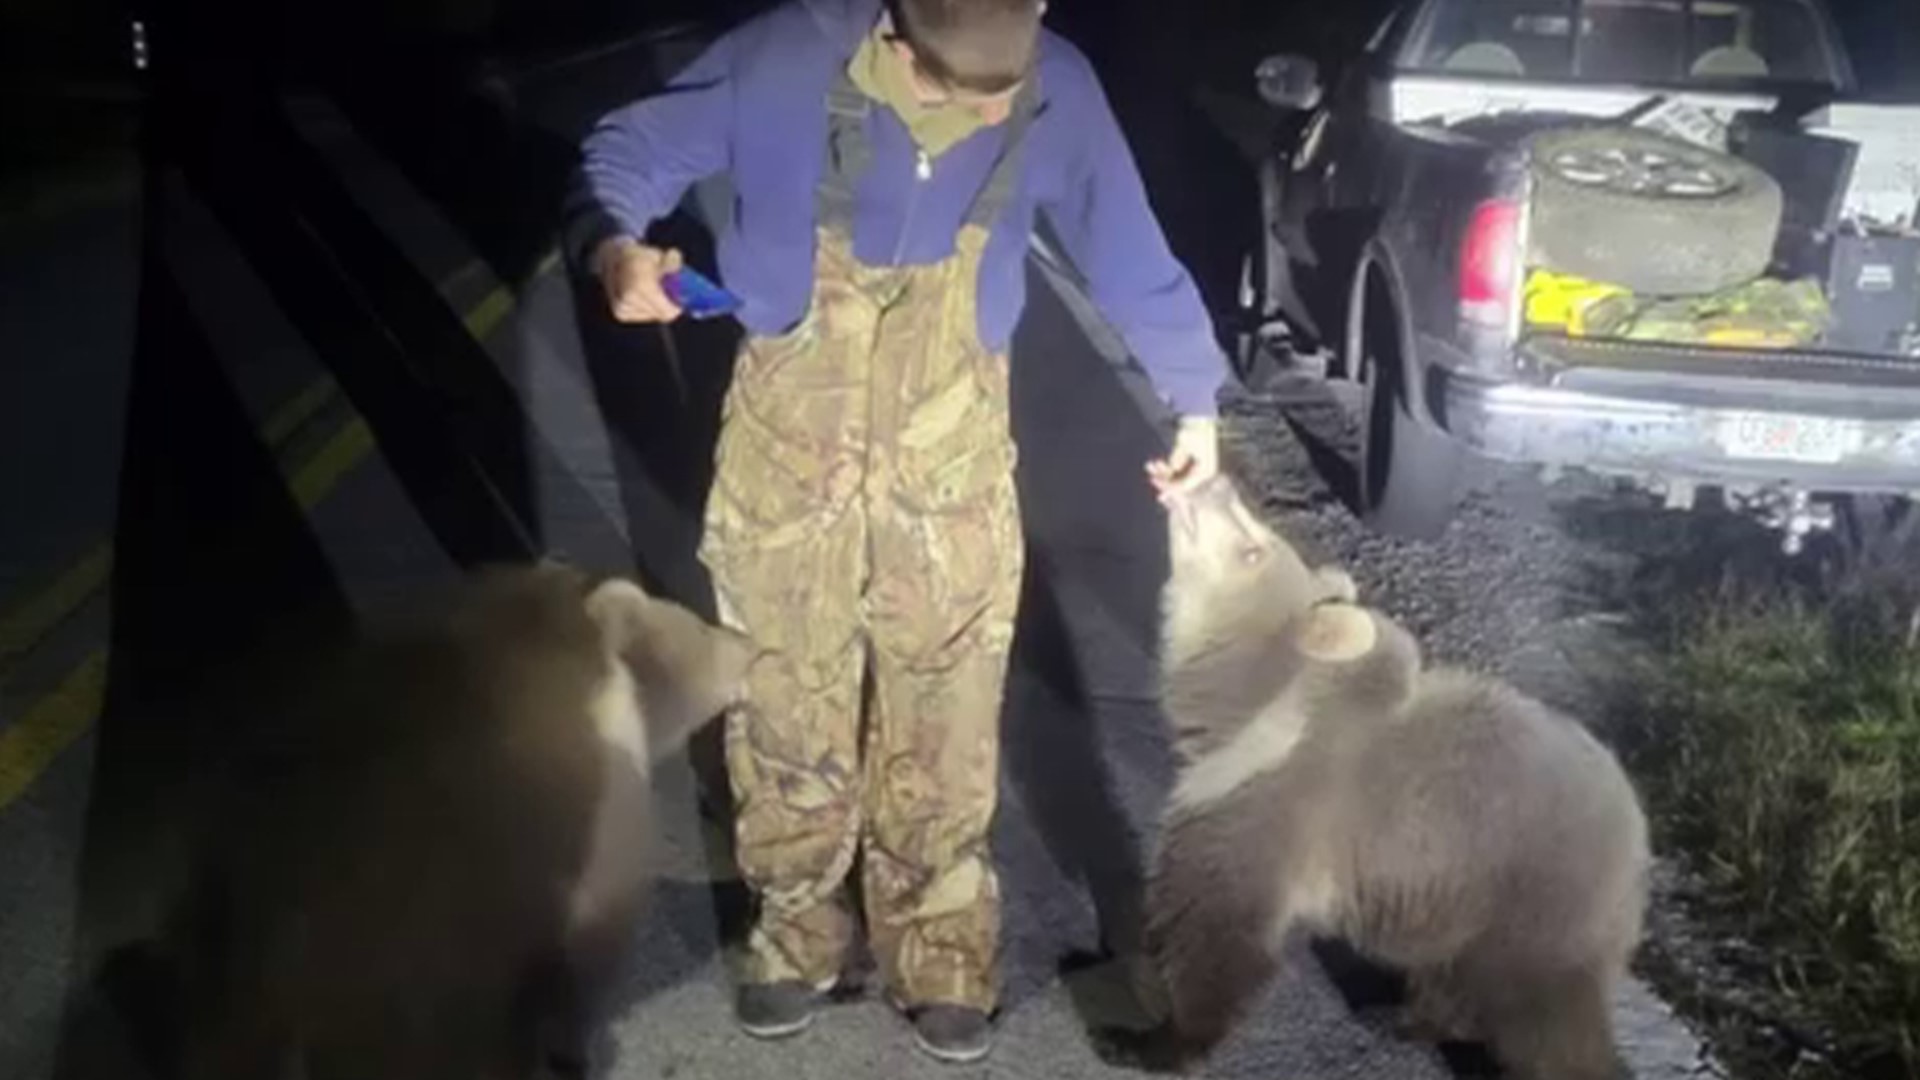 Body camera footage shows a deputy arriving on scene where a man driving by at around 3:30 in the morning was waiting along with two bear cubs.